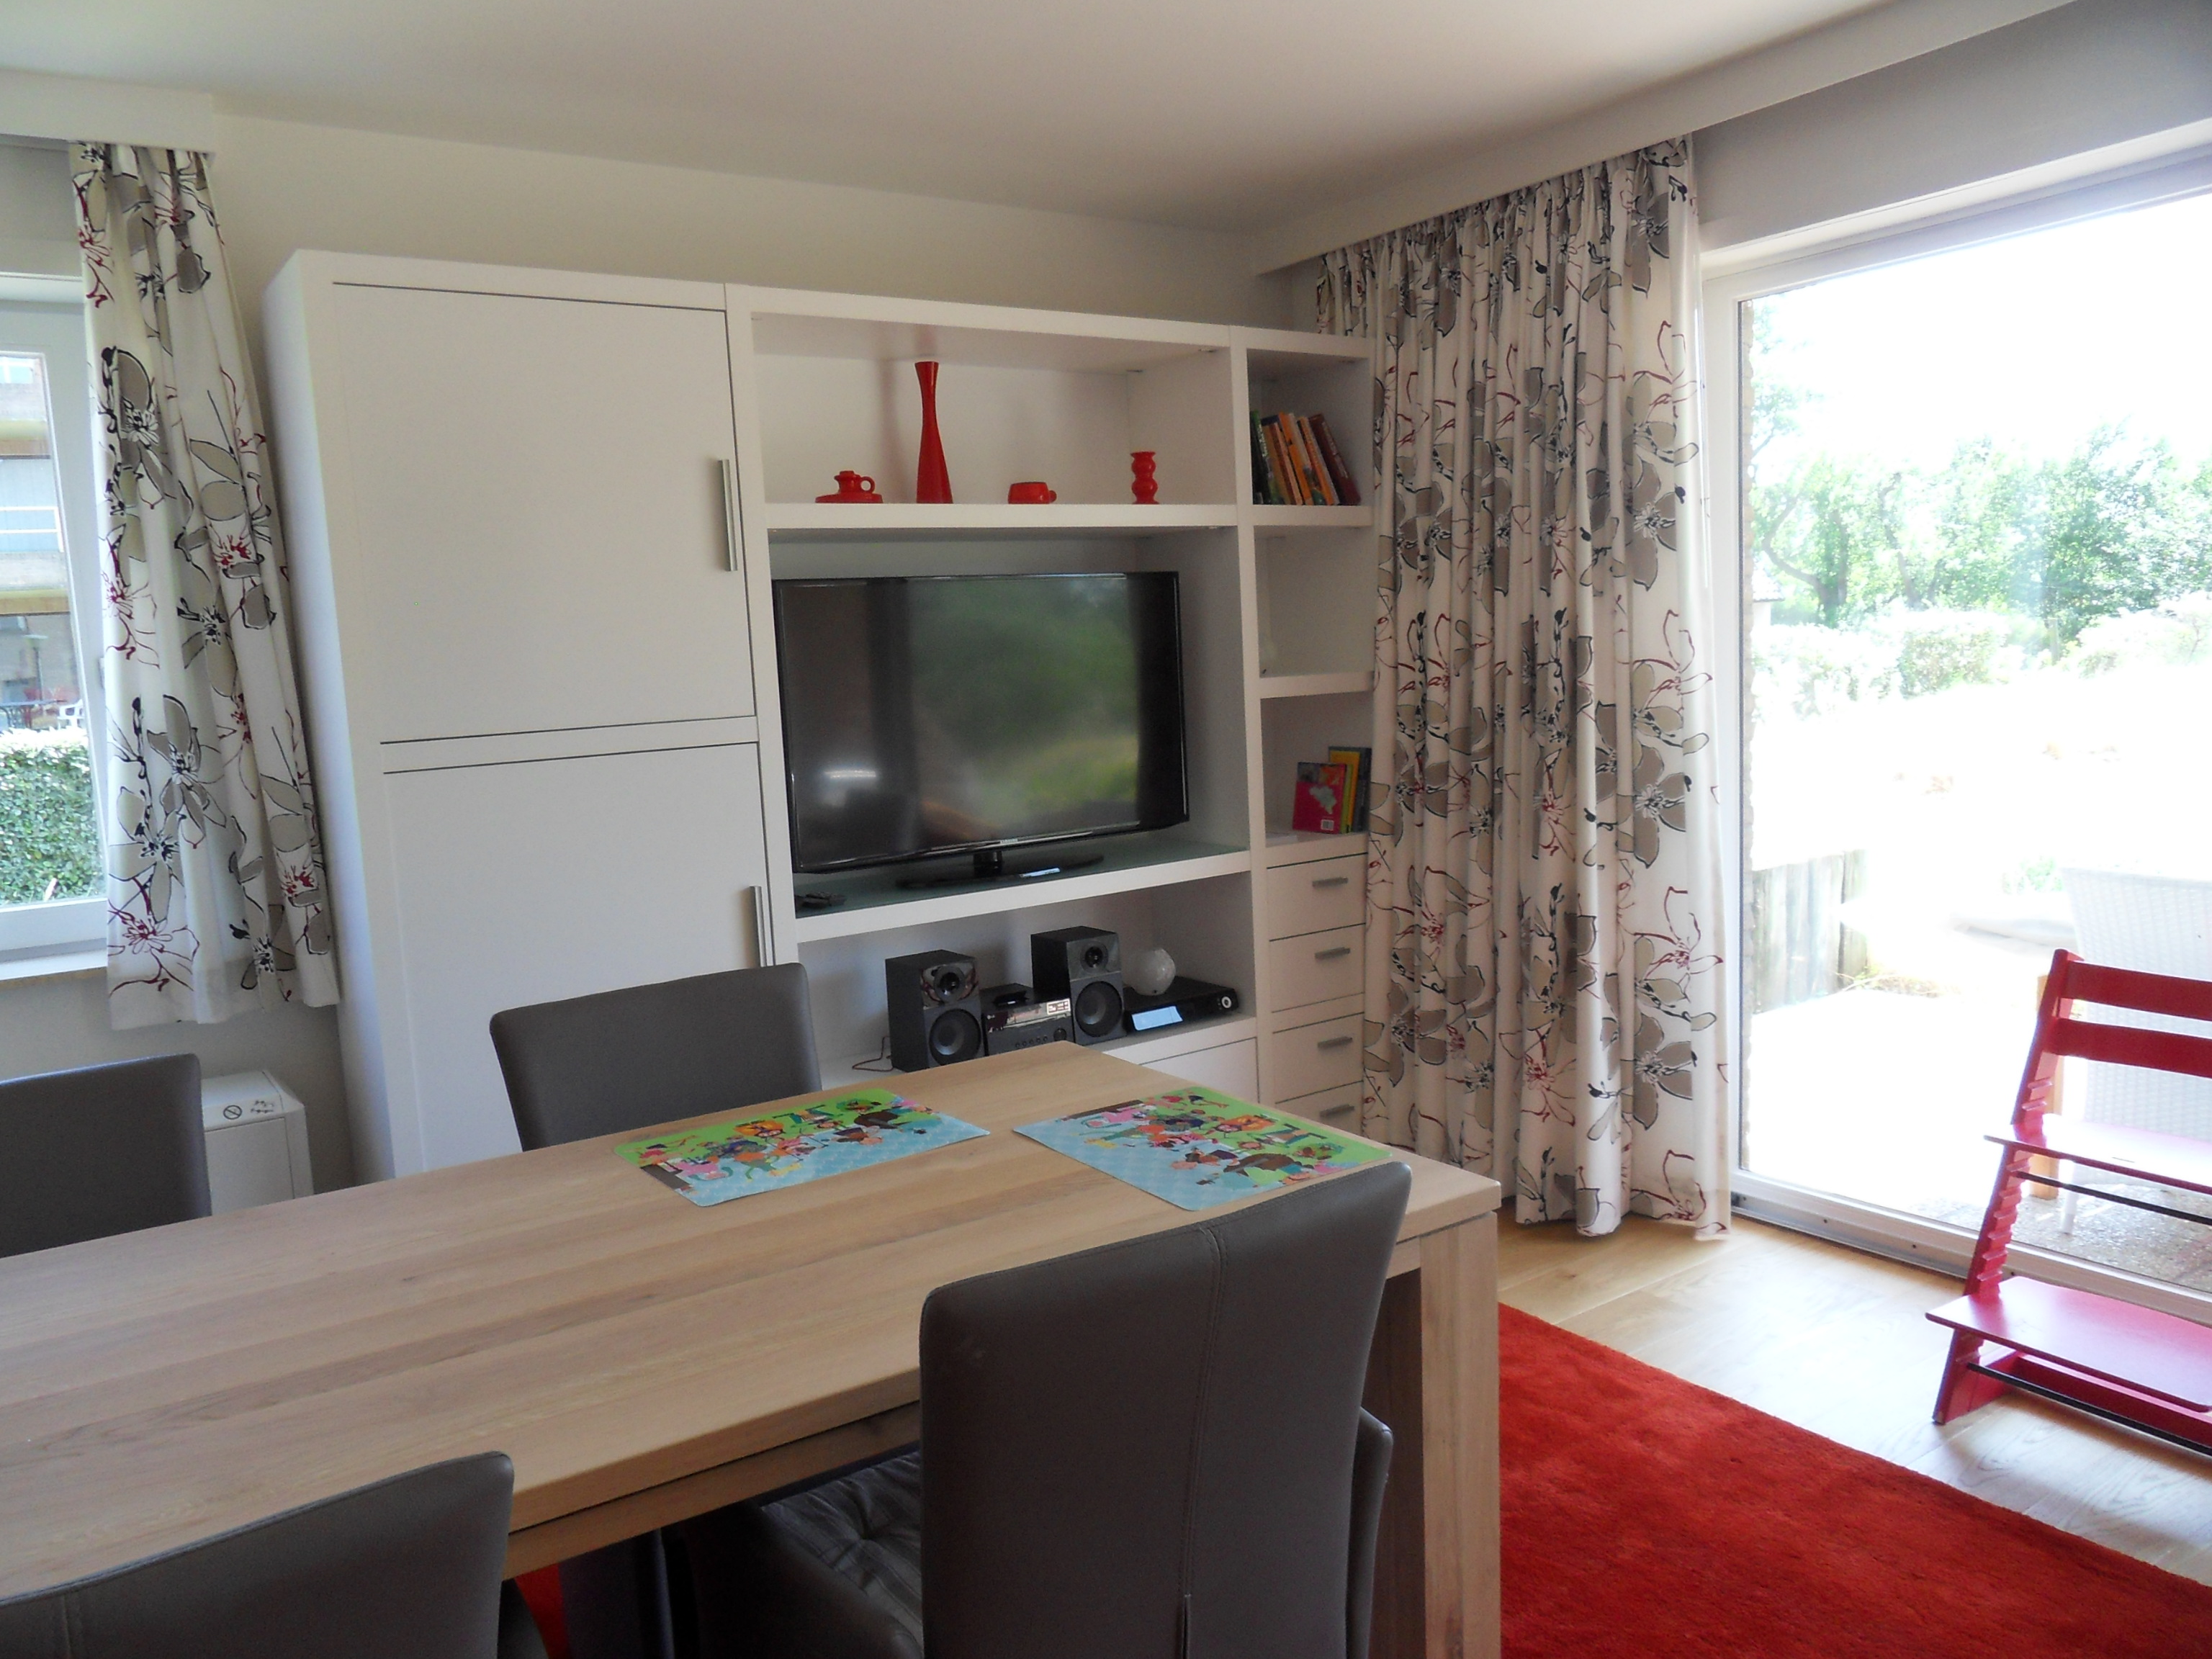 House in De Panne - Vacation, holiday rental ad # 64814 Picture #0 thumbnail